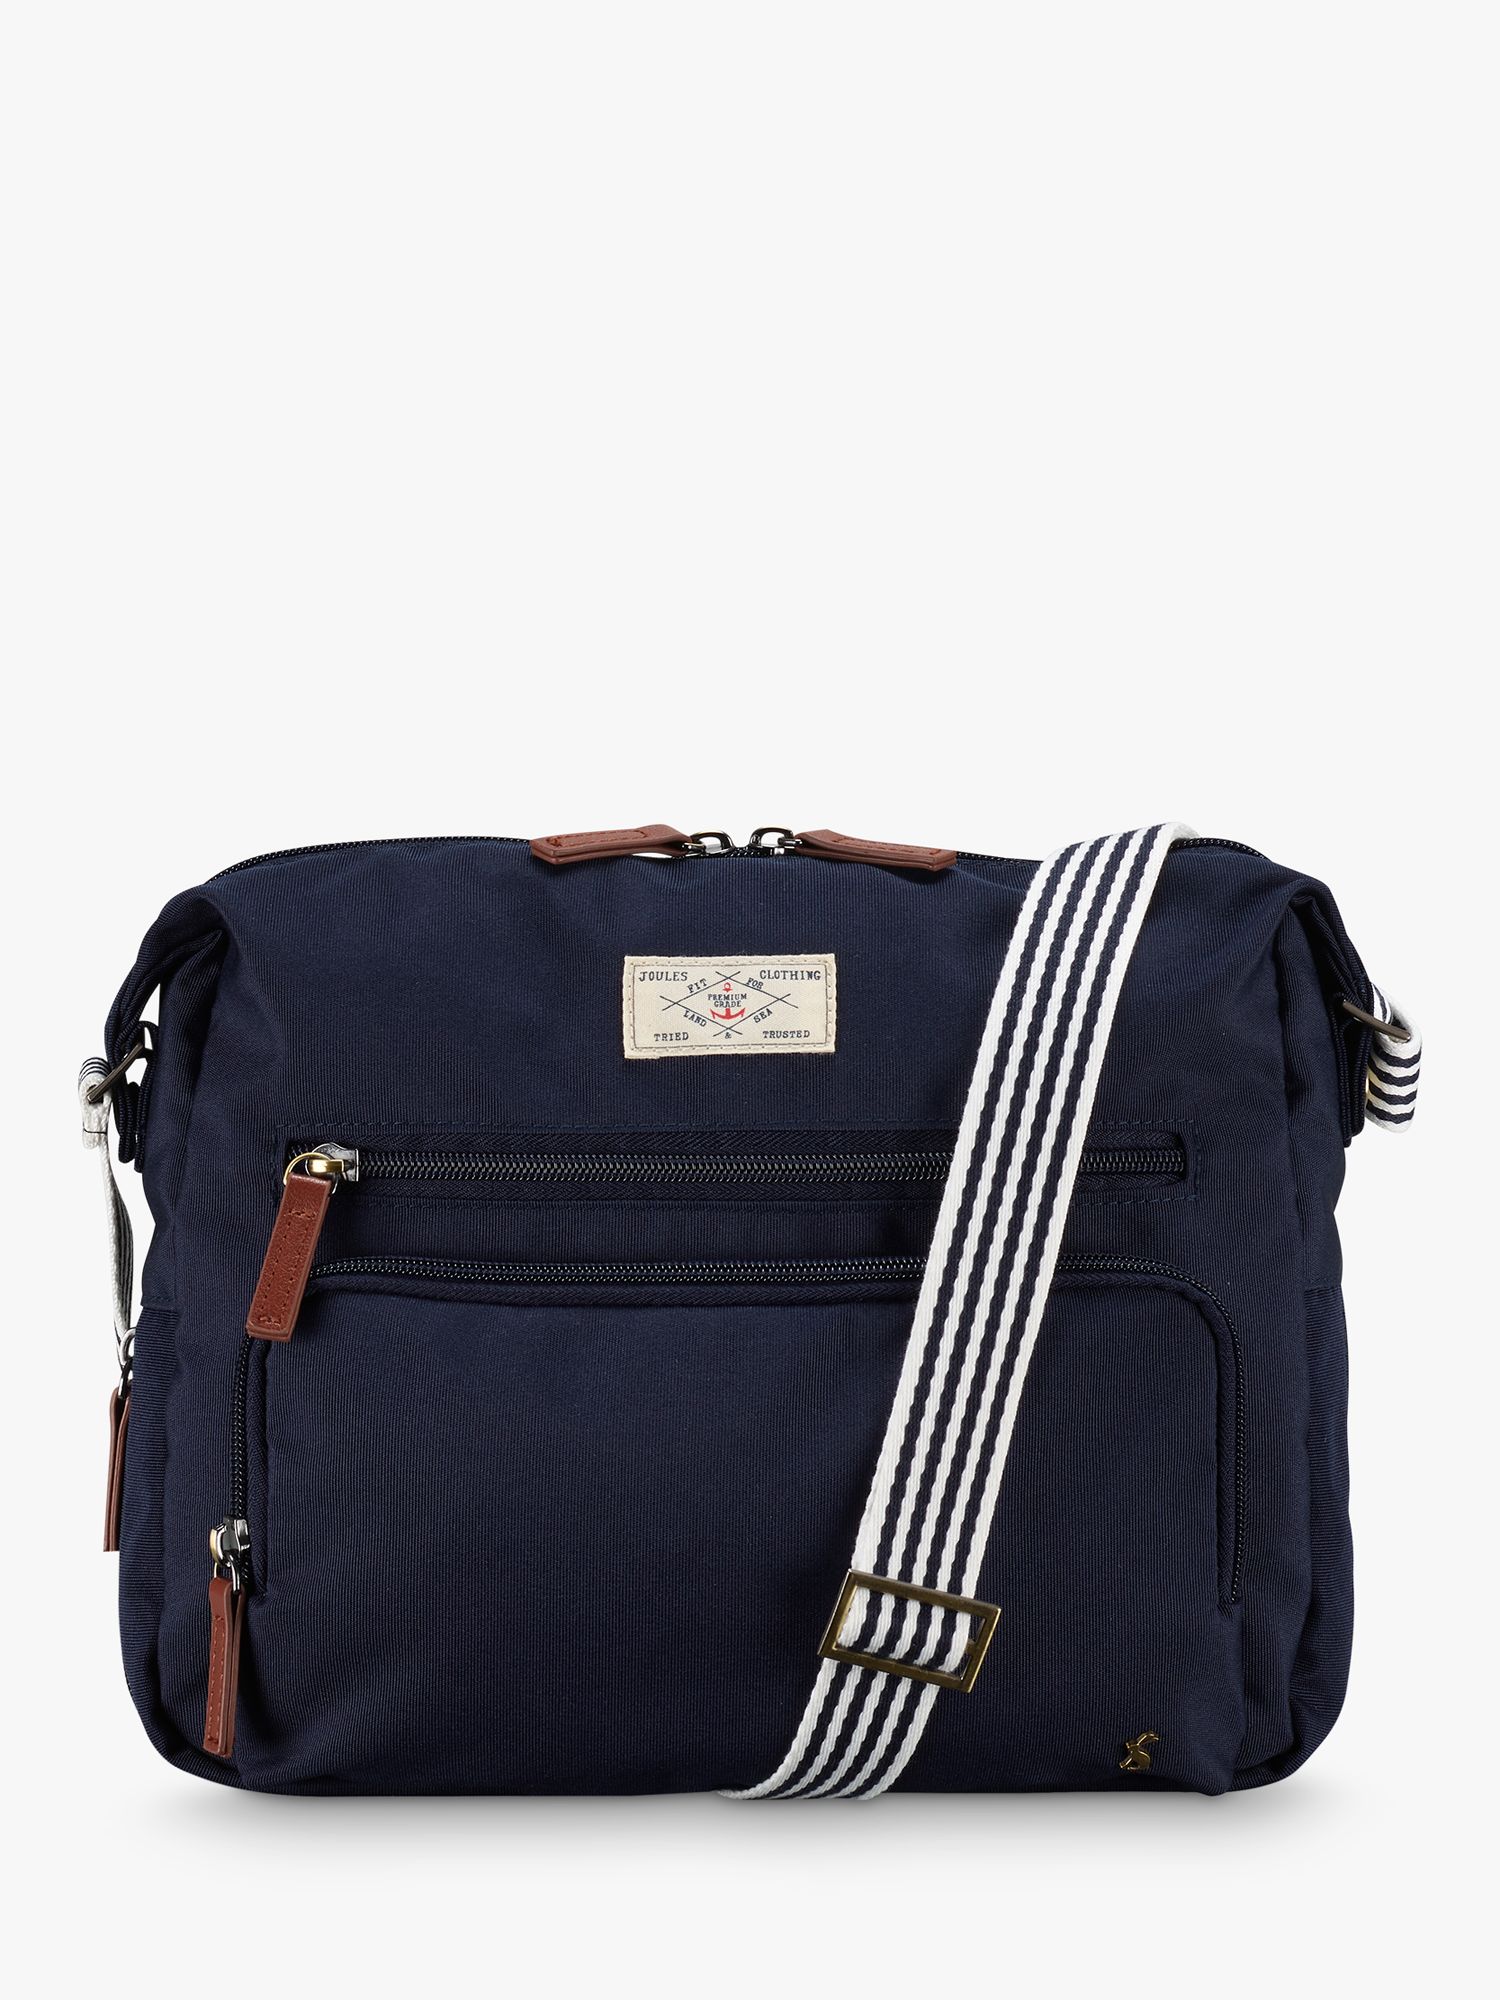 Joules Coast Collection Duffle Bag at John Lewis & Partners